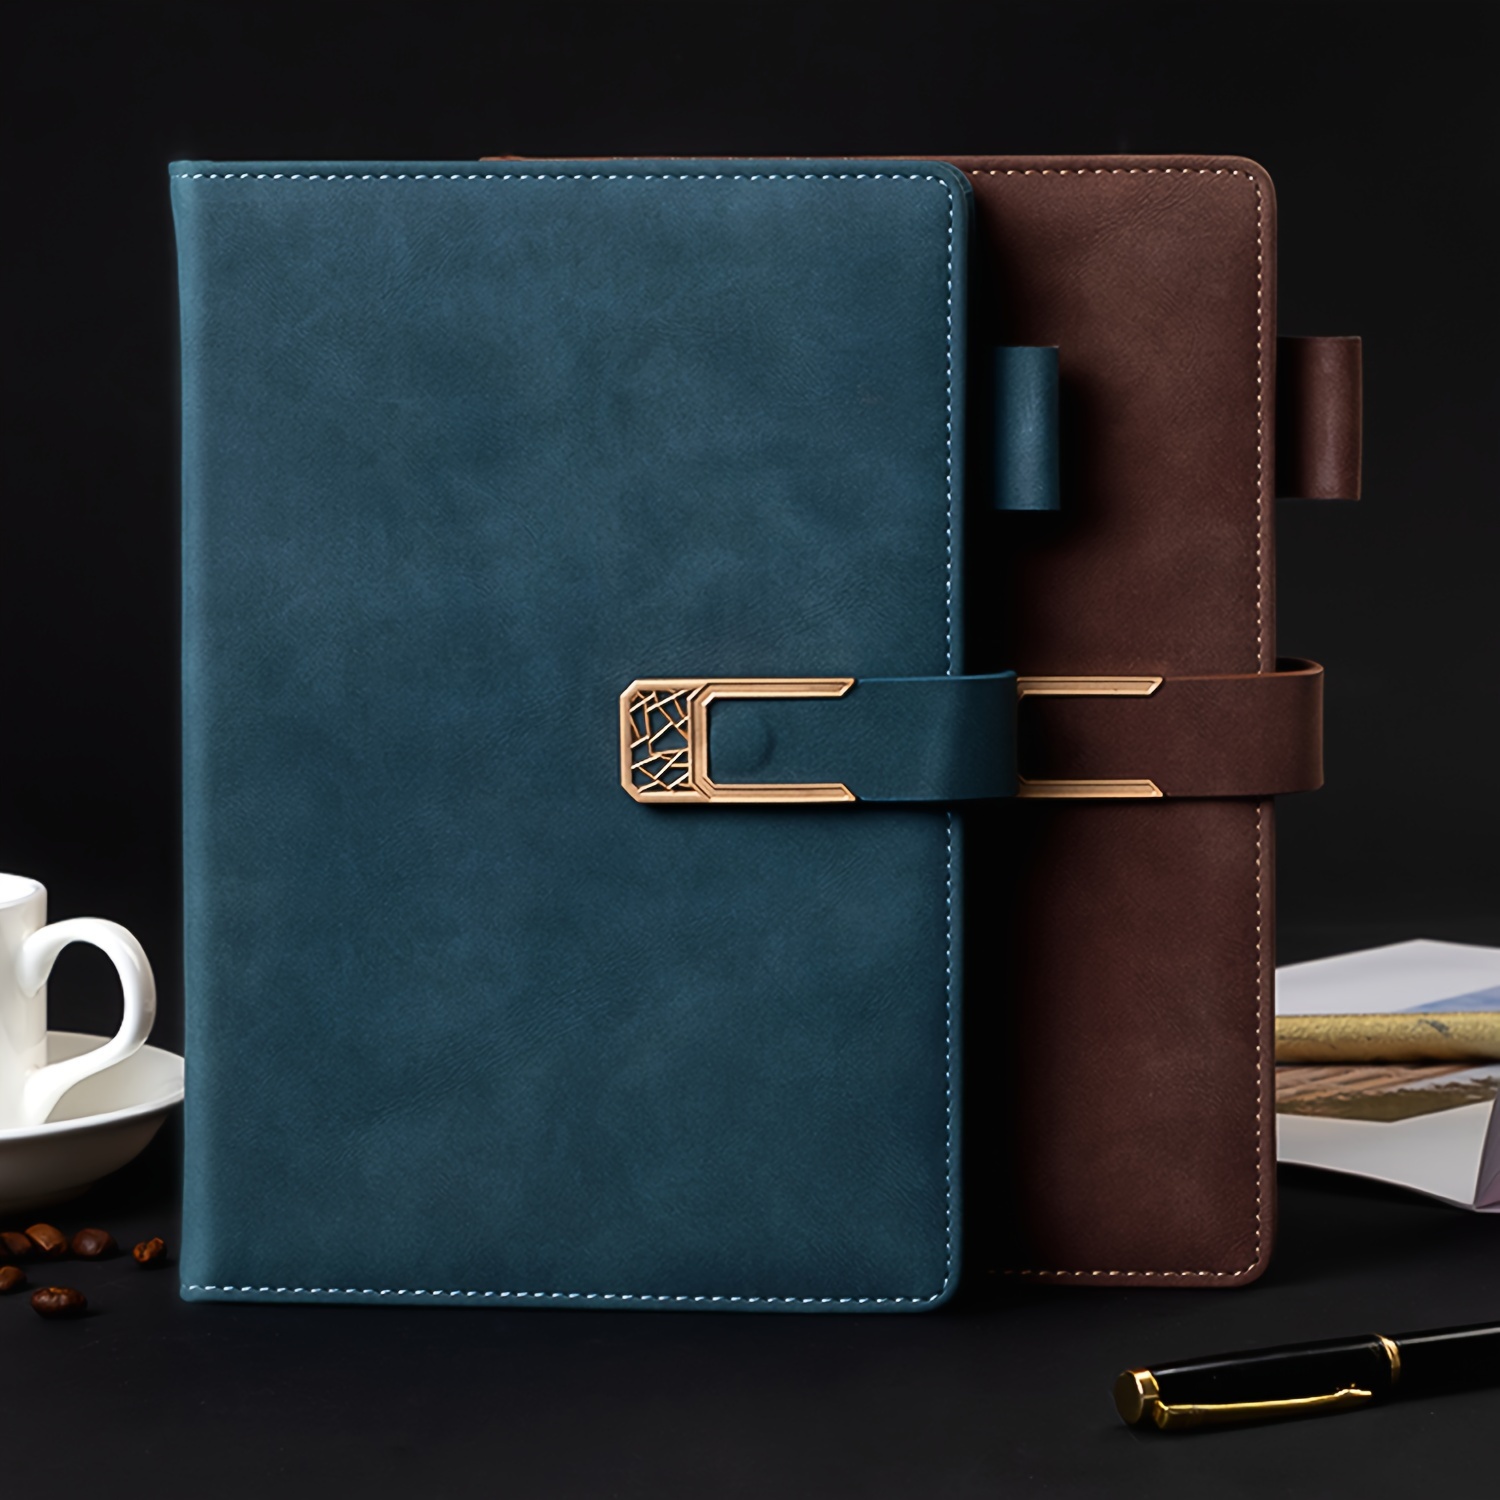 

A5 Vintage Pu Leather Business Notebook - 240 Pages - Hardcover Journal Diary With Magnetic Buckle - English Language Personal Organizer Notepad